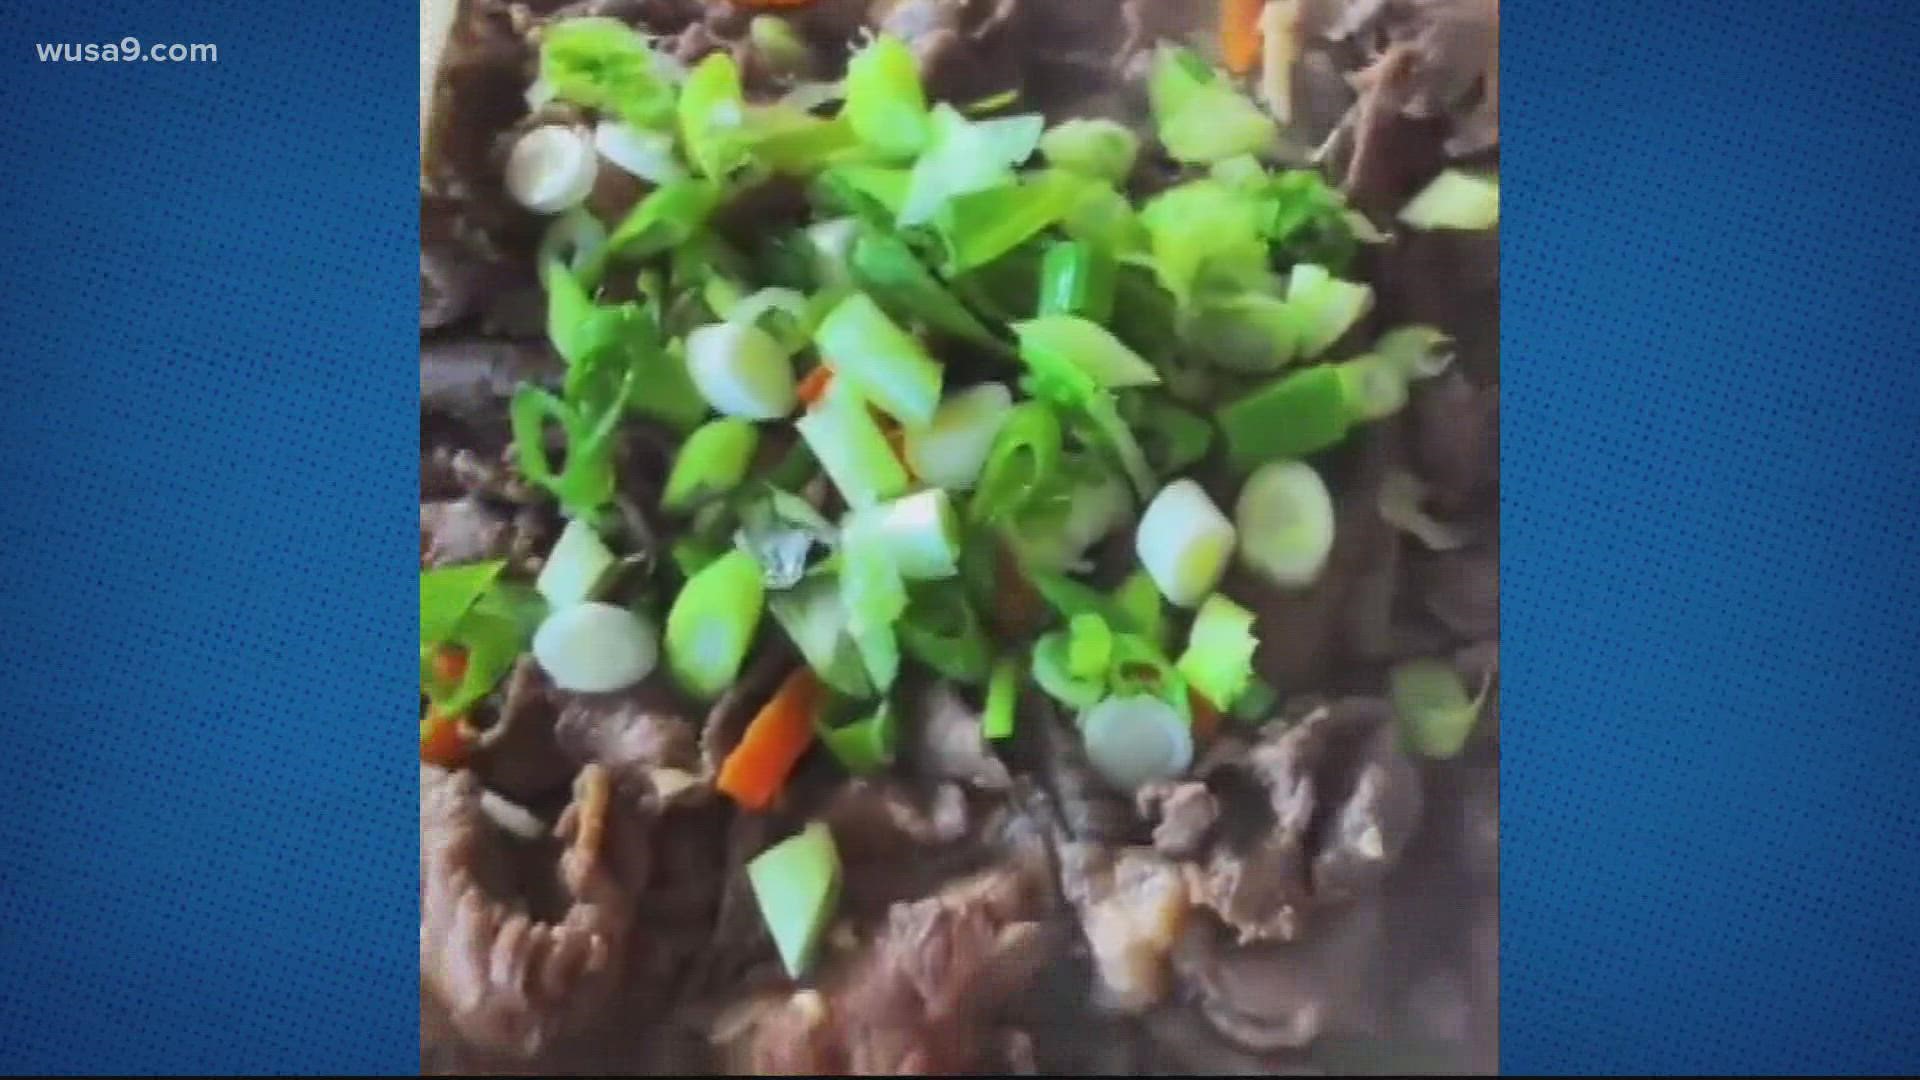 Annie shares one of her favorite things in a recipe for bulgogi